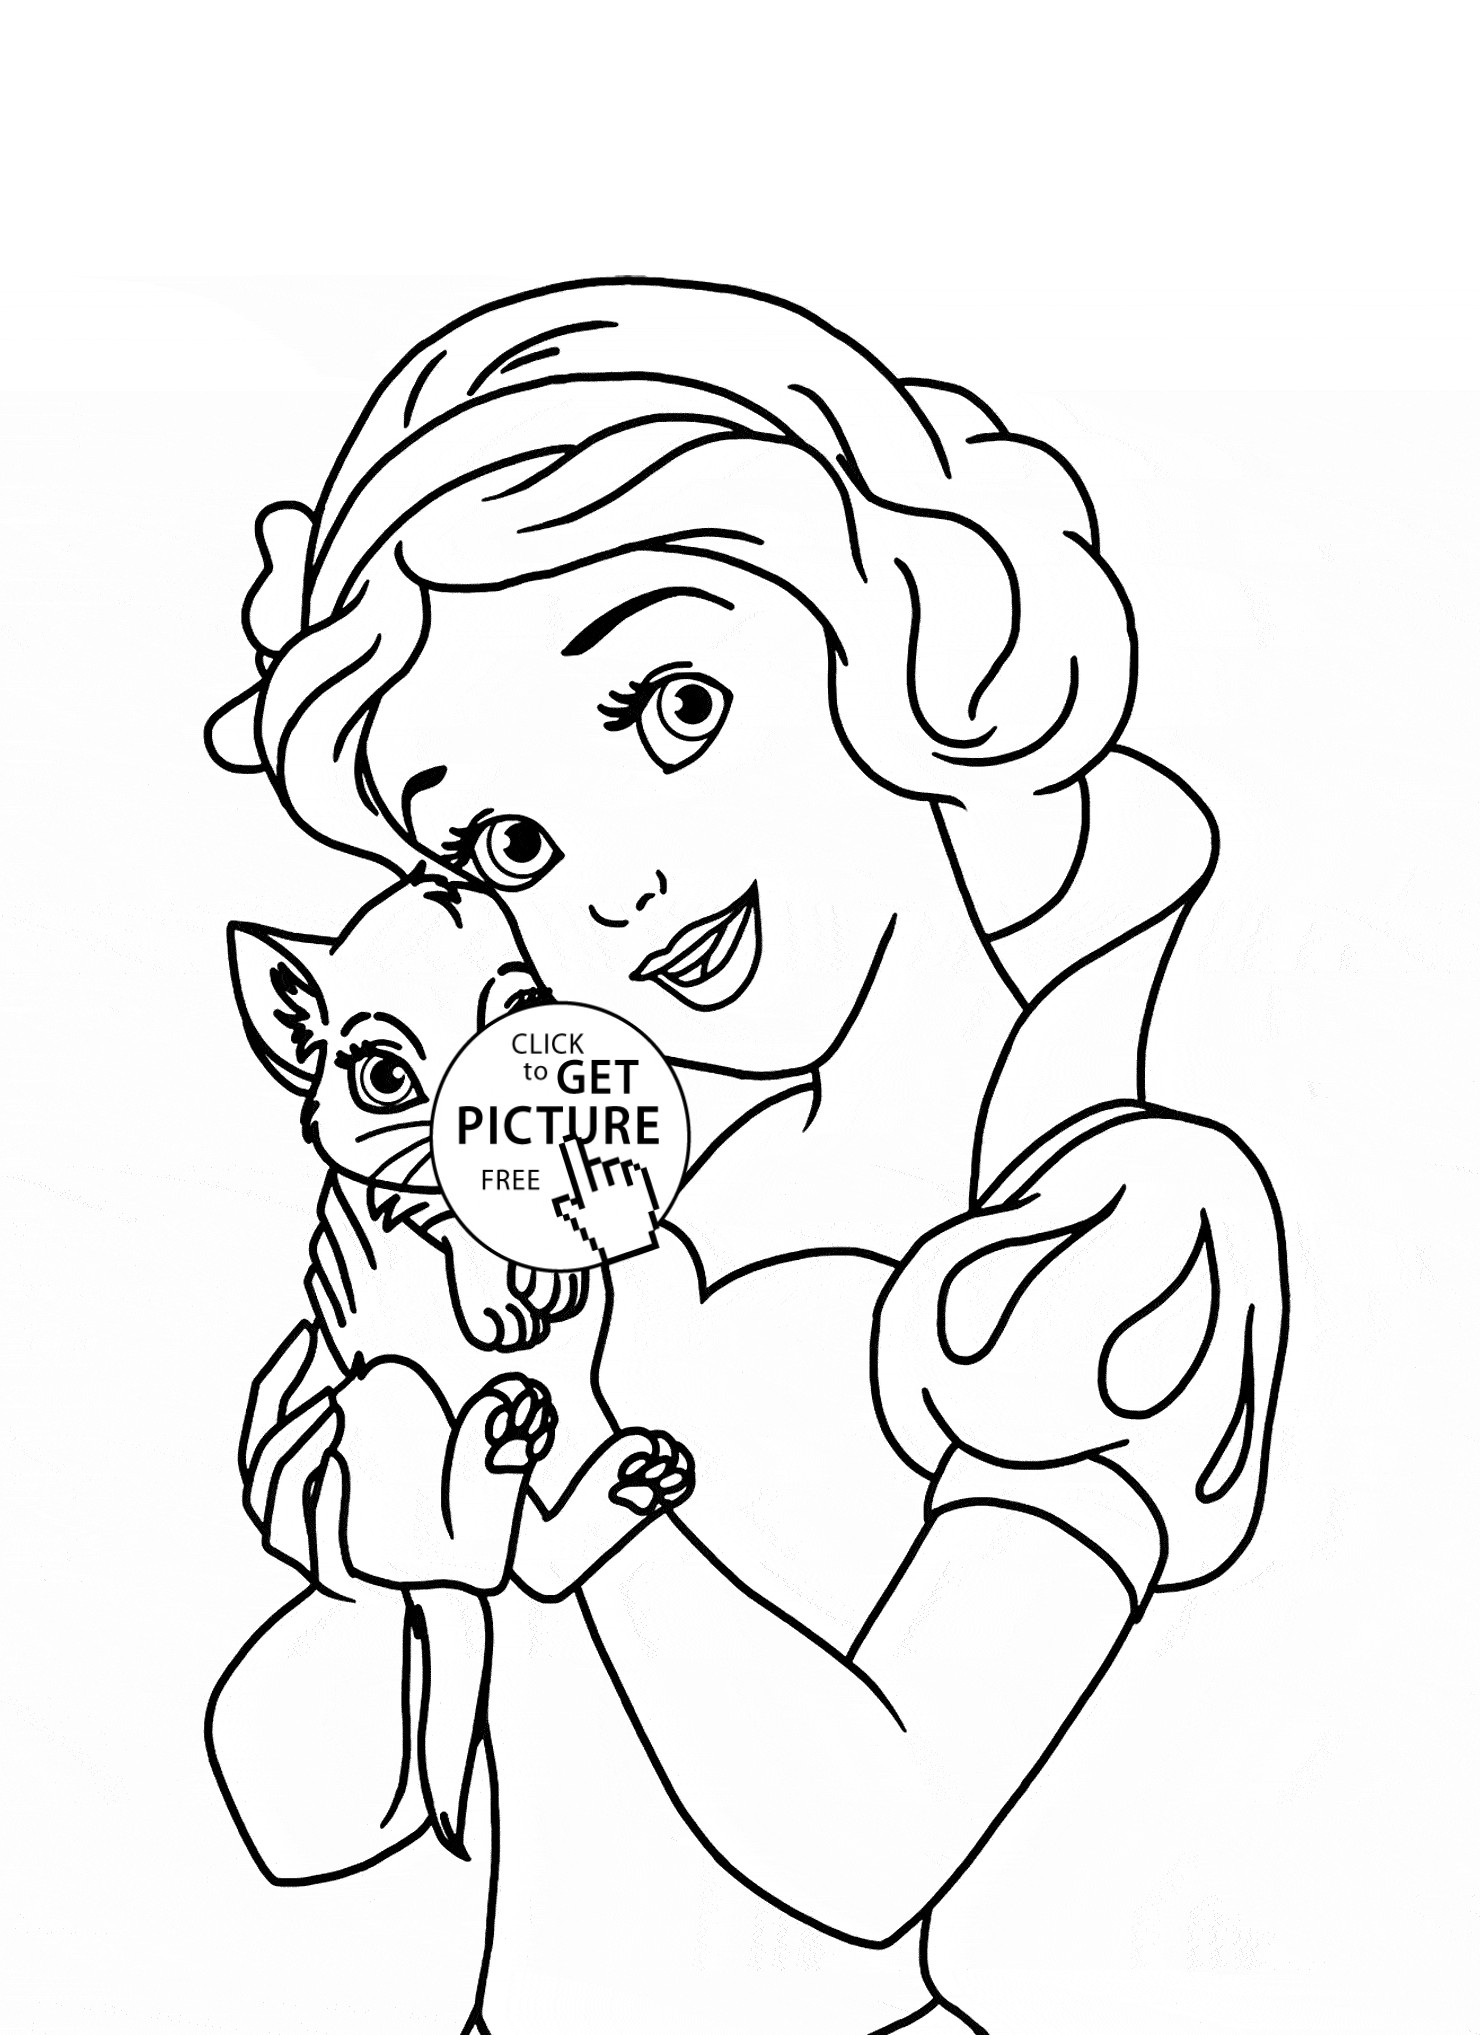 Stress Free Coloring Pages For Boys
 Stress Free Drawing at GetDrawings